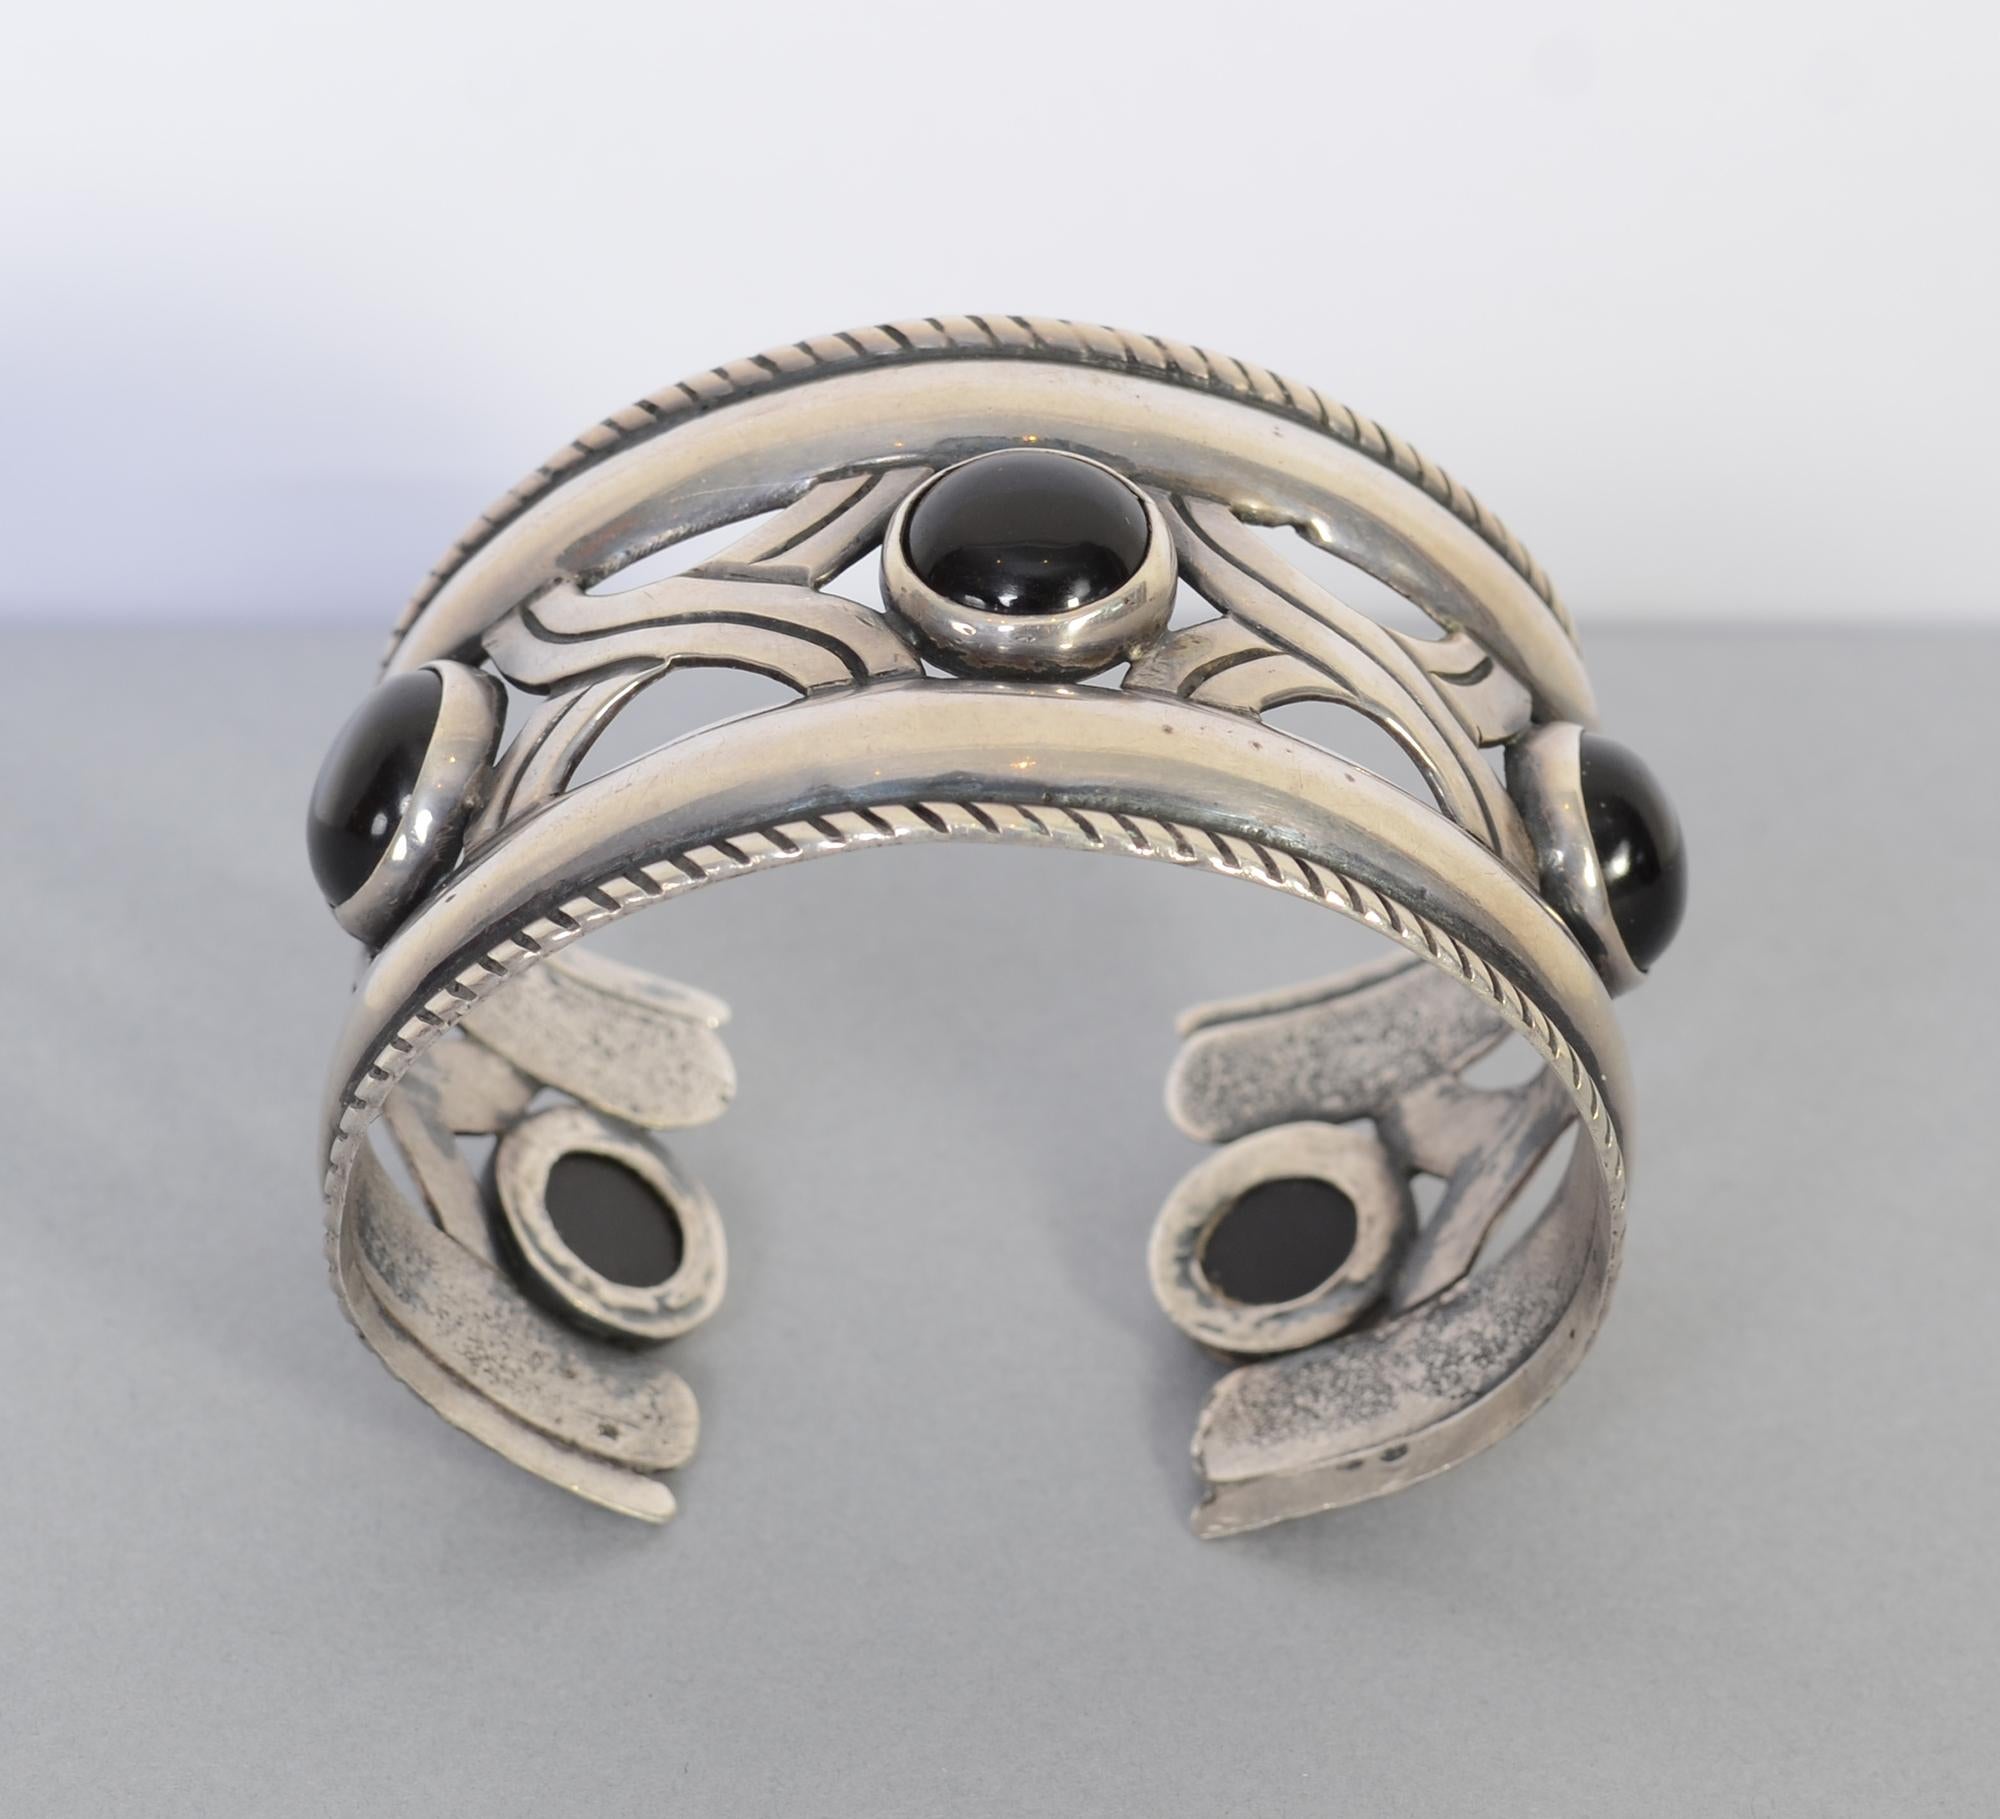 Unusual cuff bracelet by silver master, Hector Aguilar. The bracelet alternates five cabochon onyx stones with stylized silver X's. The X's, as well as the rope banding on top and bottom, are oxidized to carry through the black of the onyx